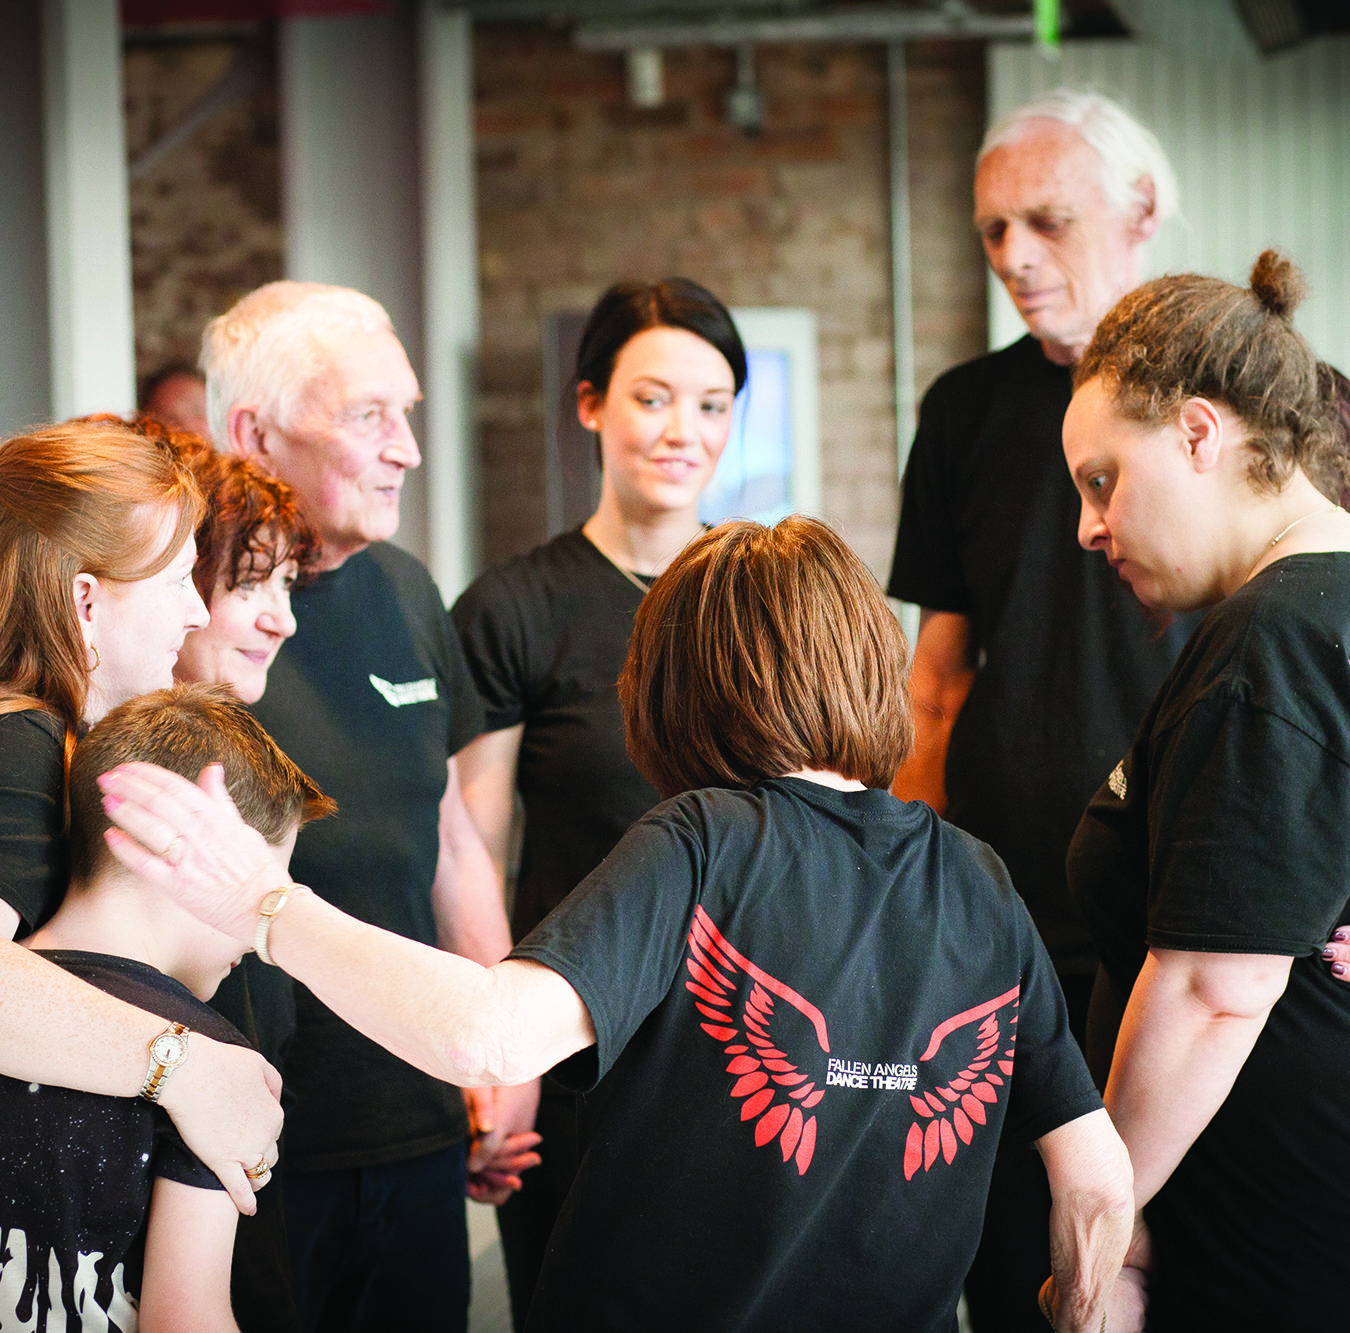 A group of people wearing black t-shirts with a picture of red wings on. They are close together as if hugging in a circle.